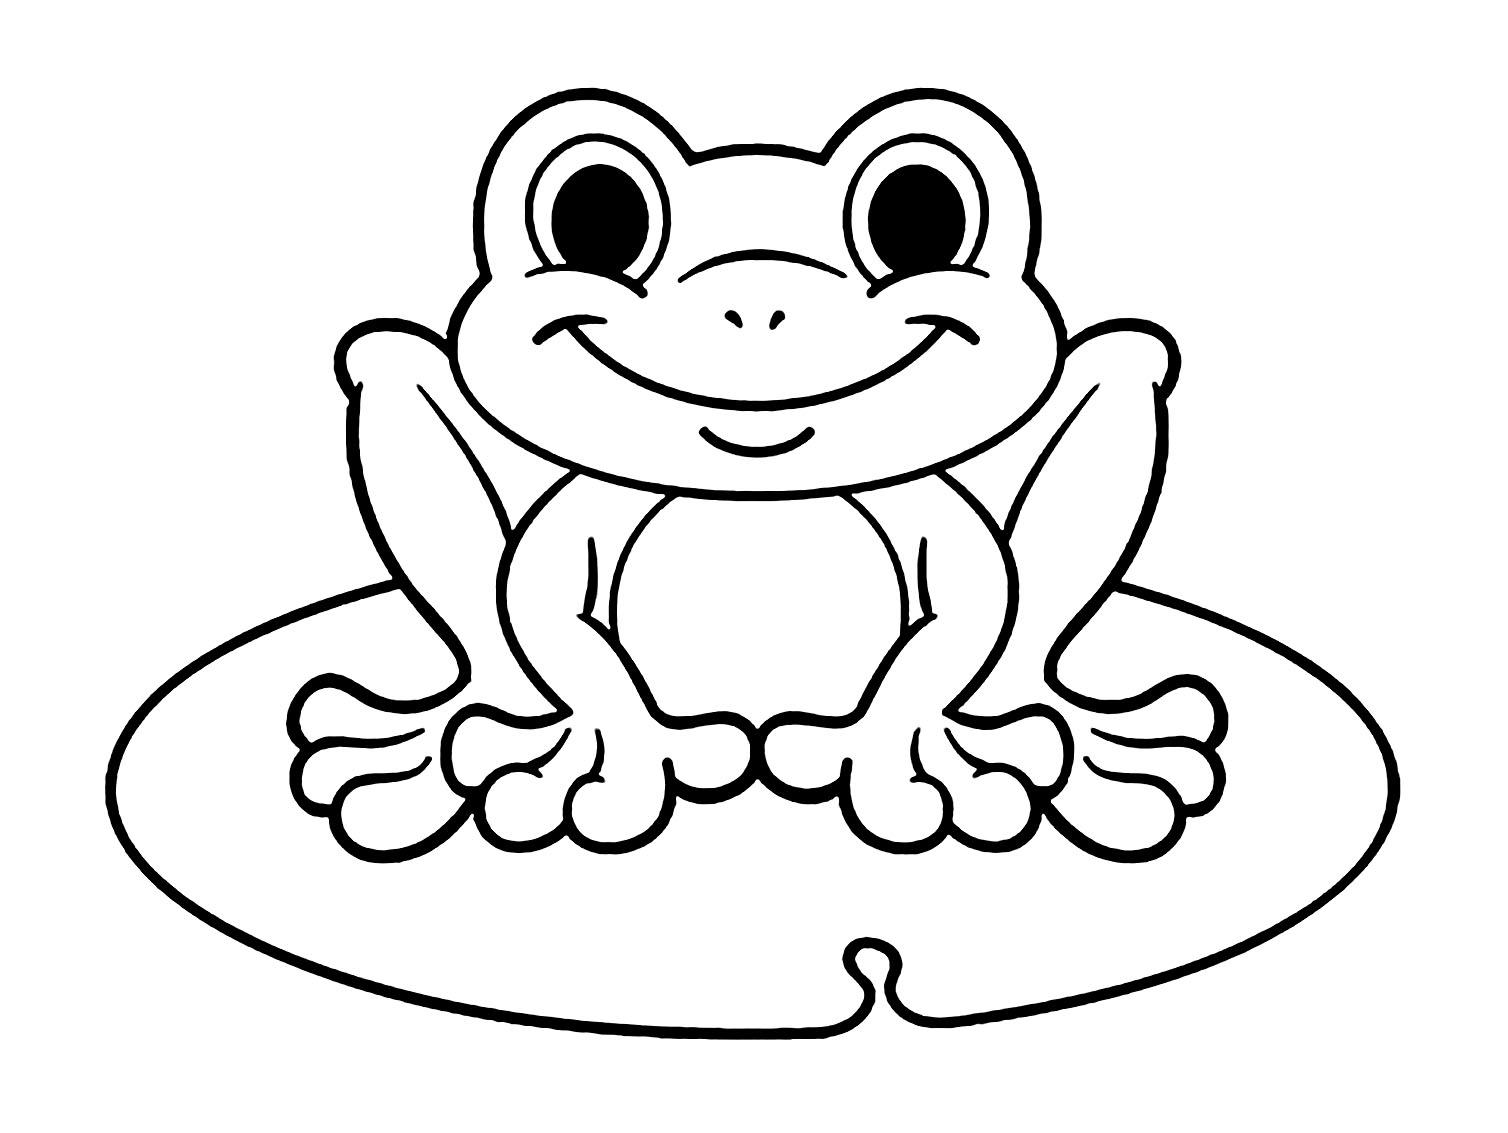 Easy Drawing Guides - How to Draw a Frog. Easy to Draw Art Project for Kids.  See the Full Drawing Tutorial on http://bit.ly/2U2mlPz . #Frog #HowToDraw  #Spring | Facebook